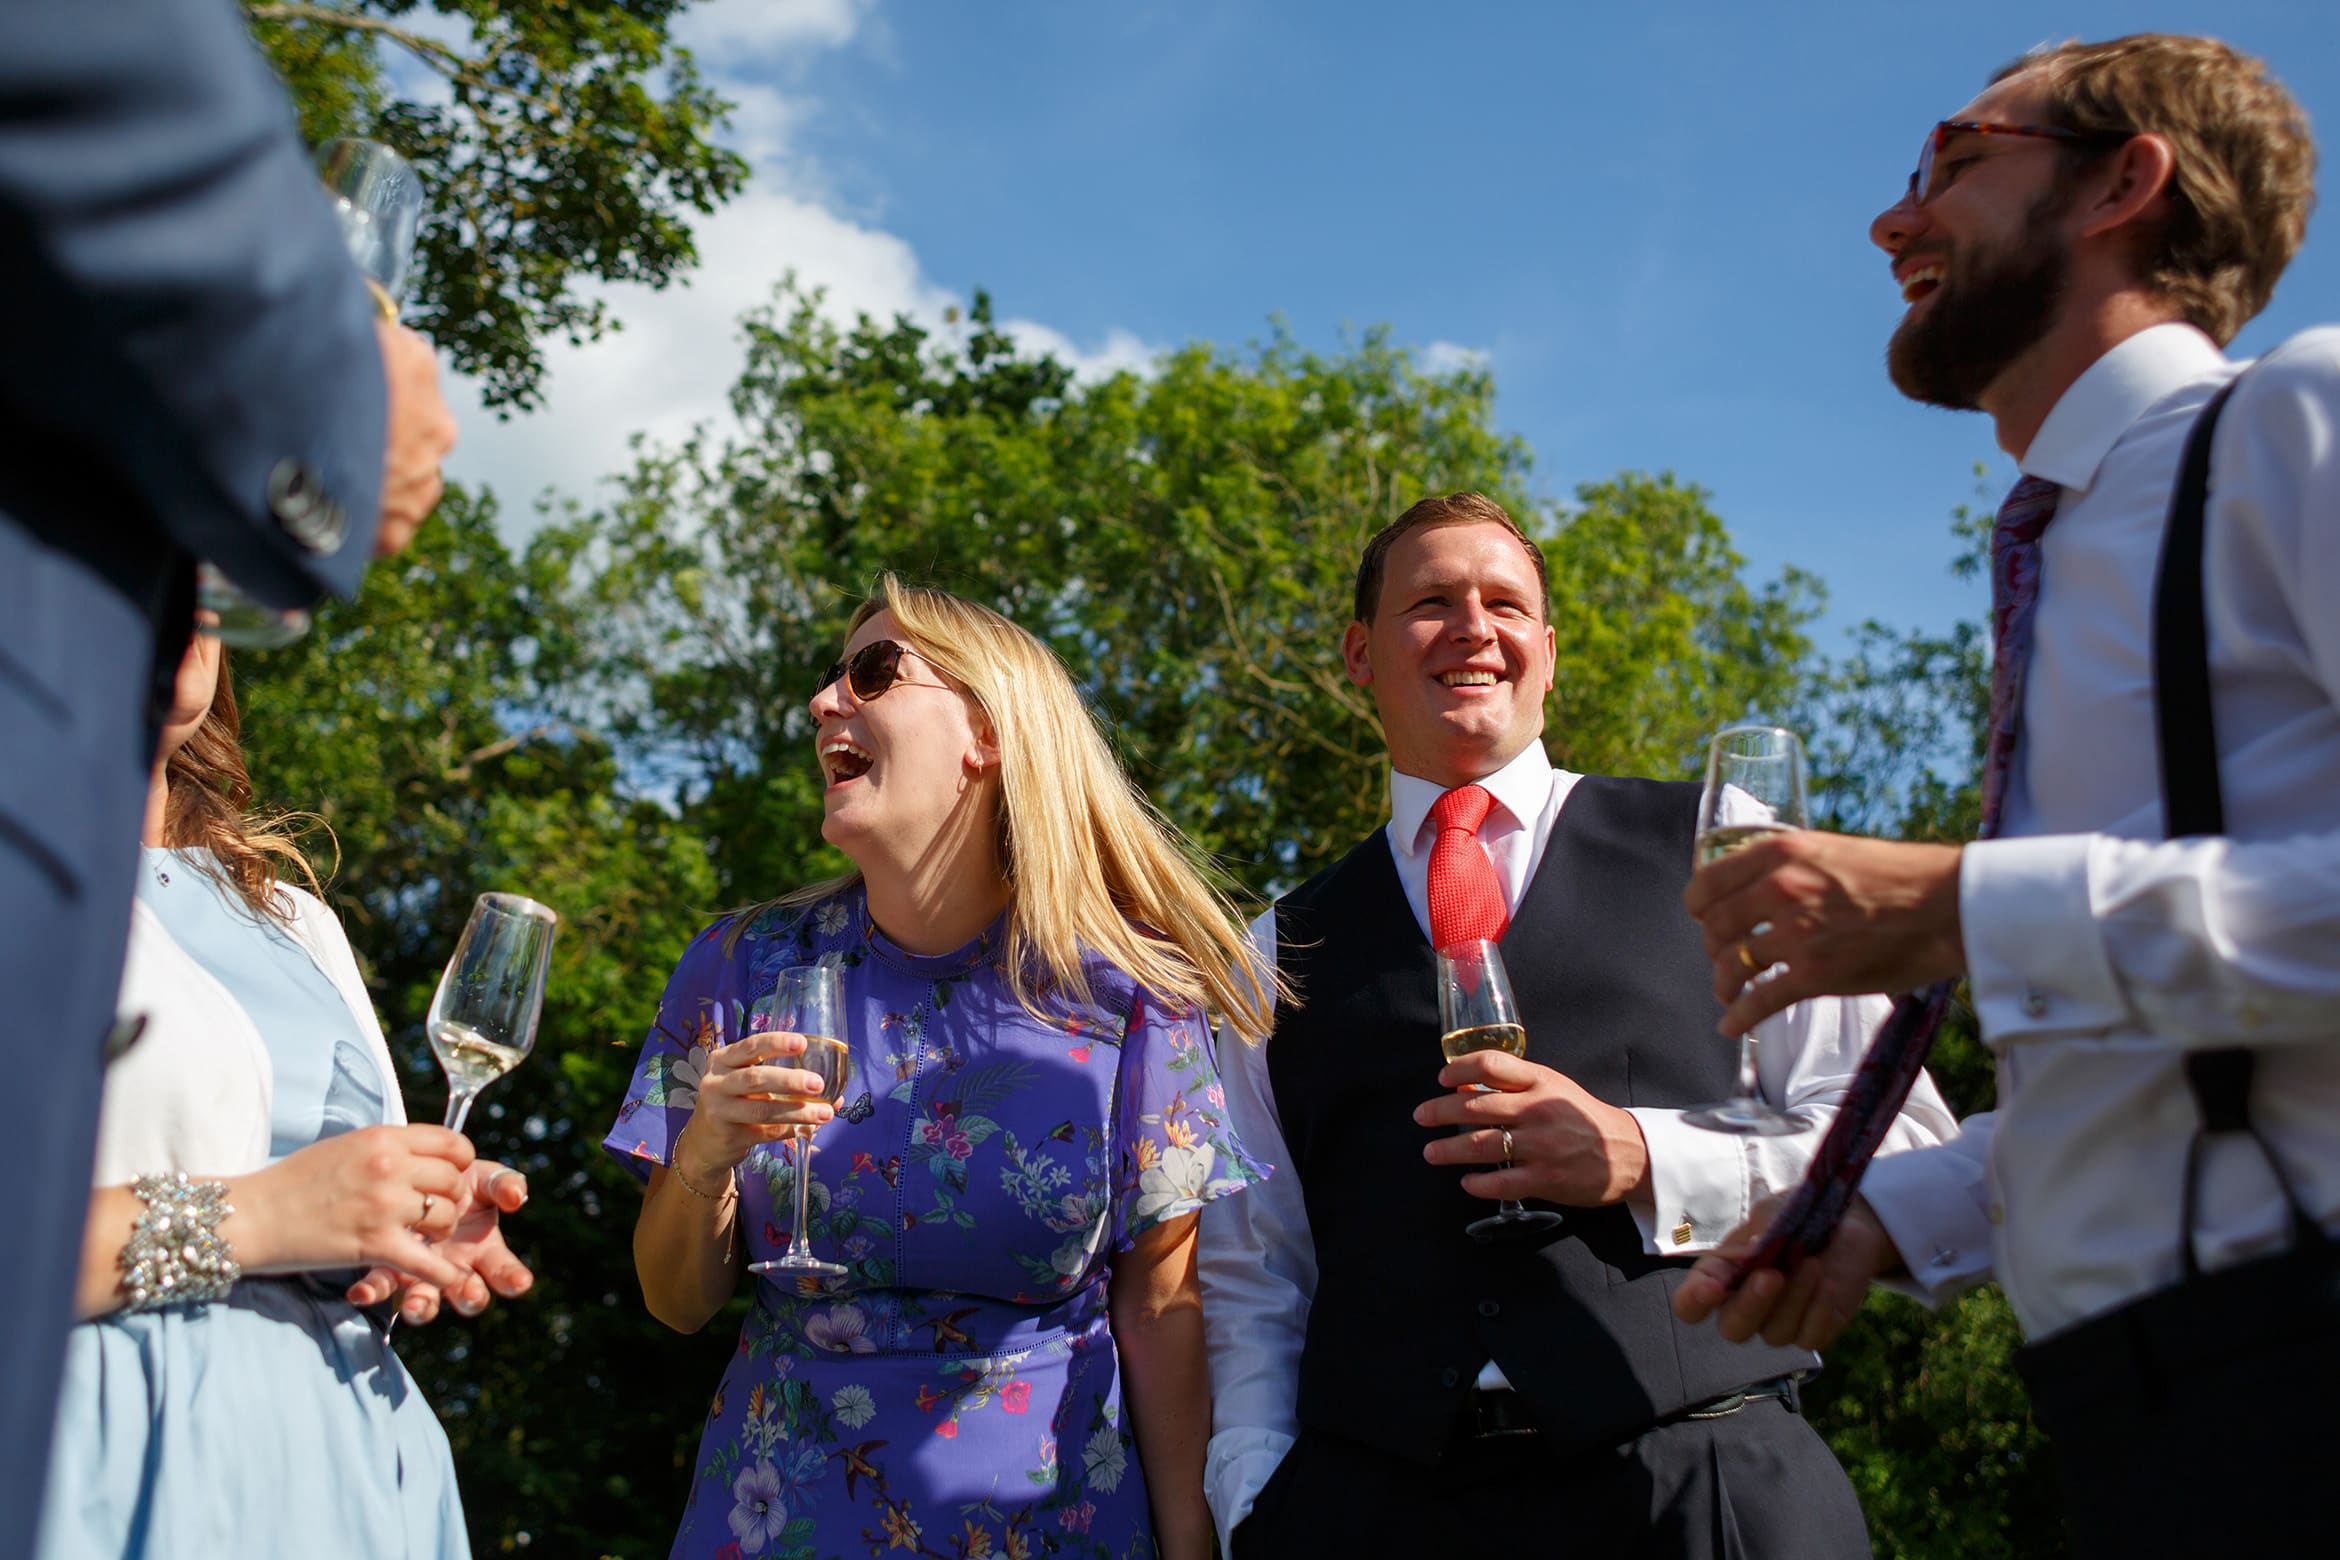 the groom laughs with his family